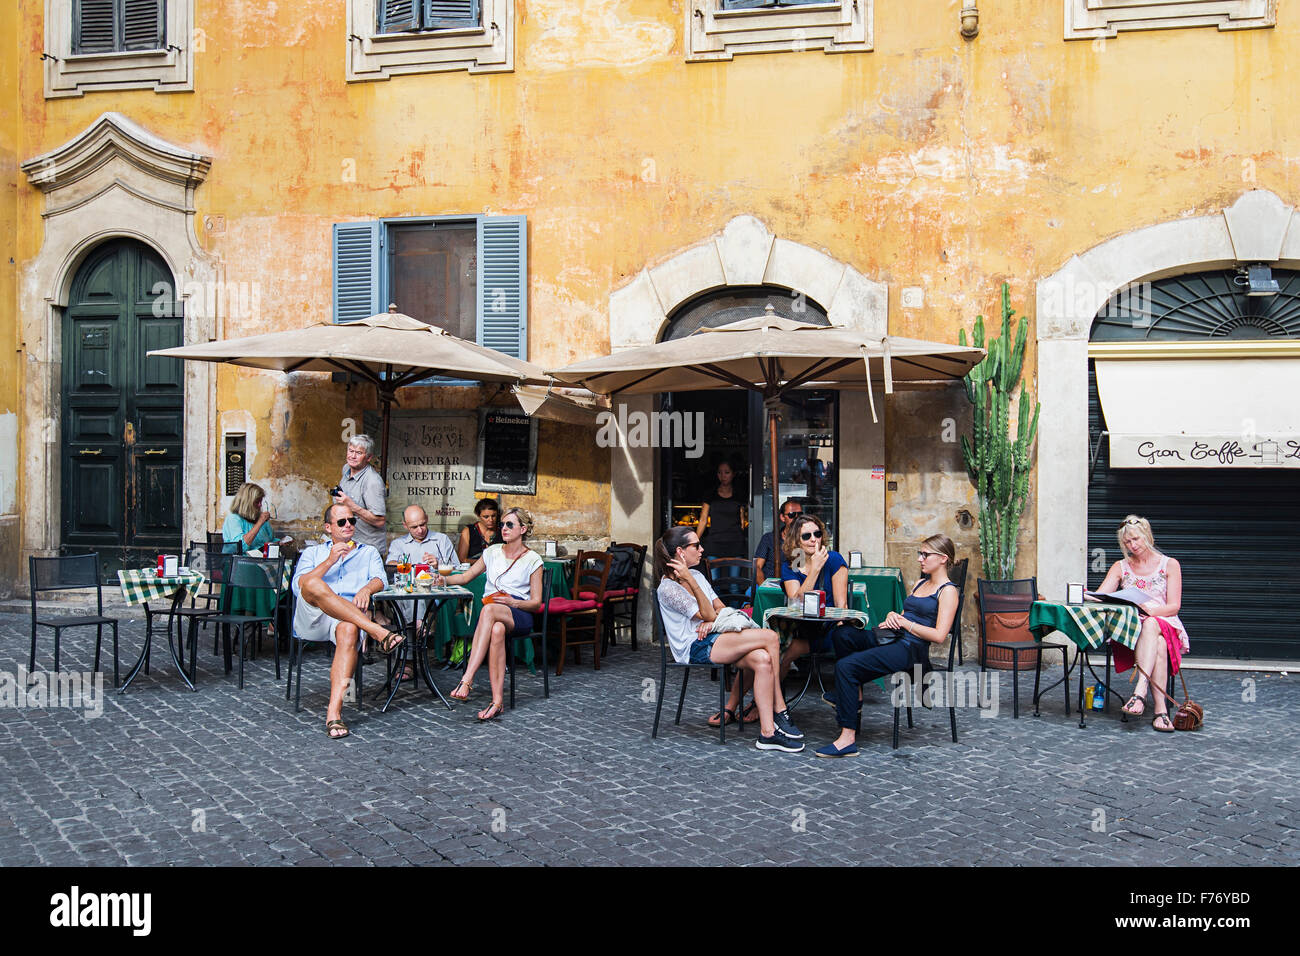 Tourists in a bar, Rome Stock Photo